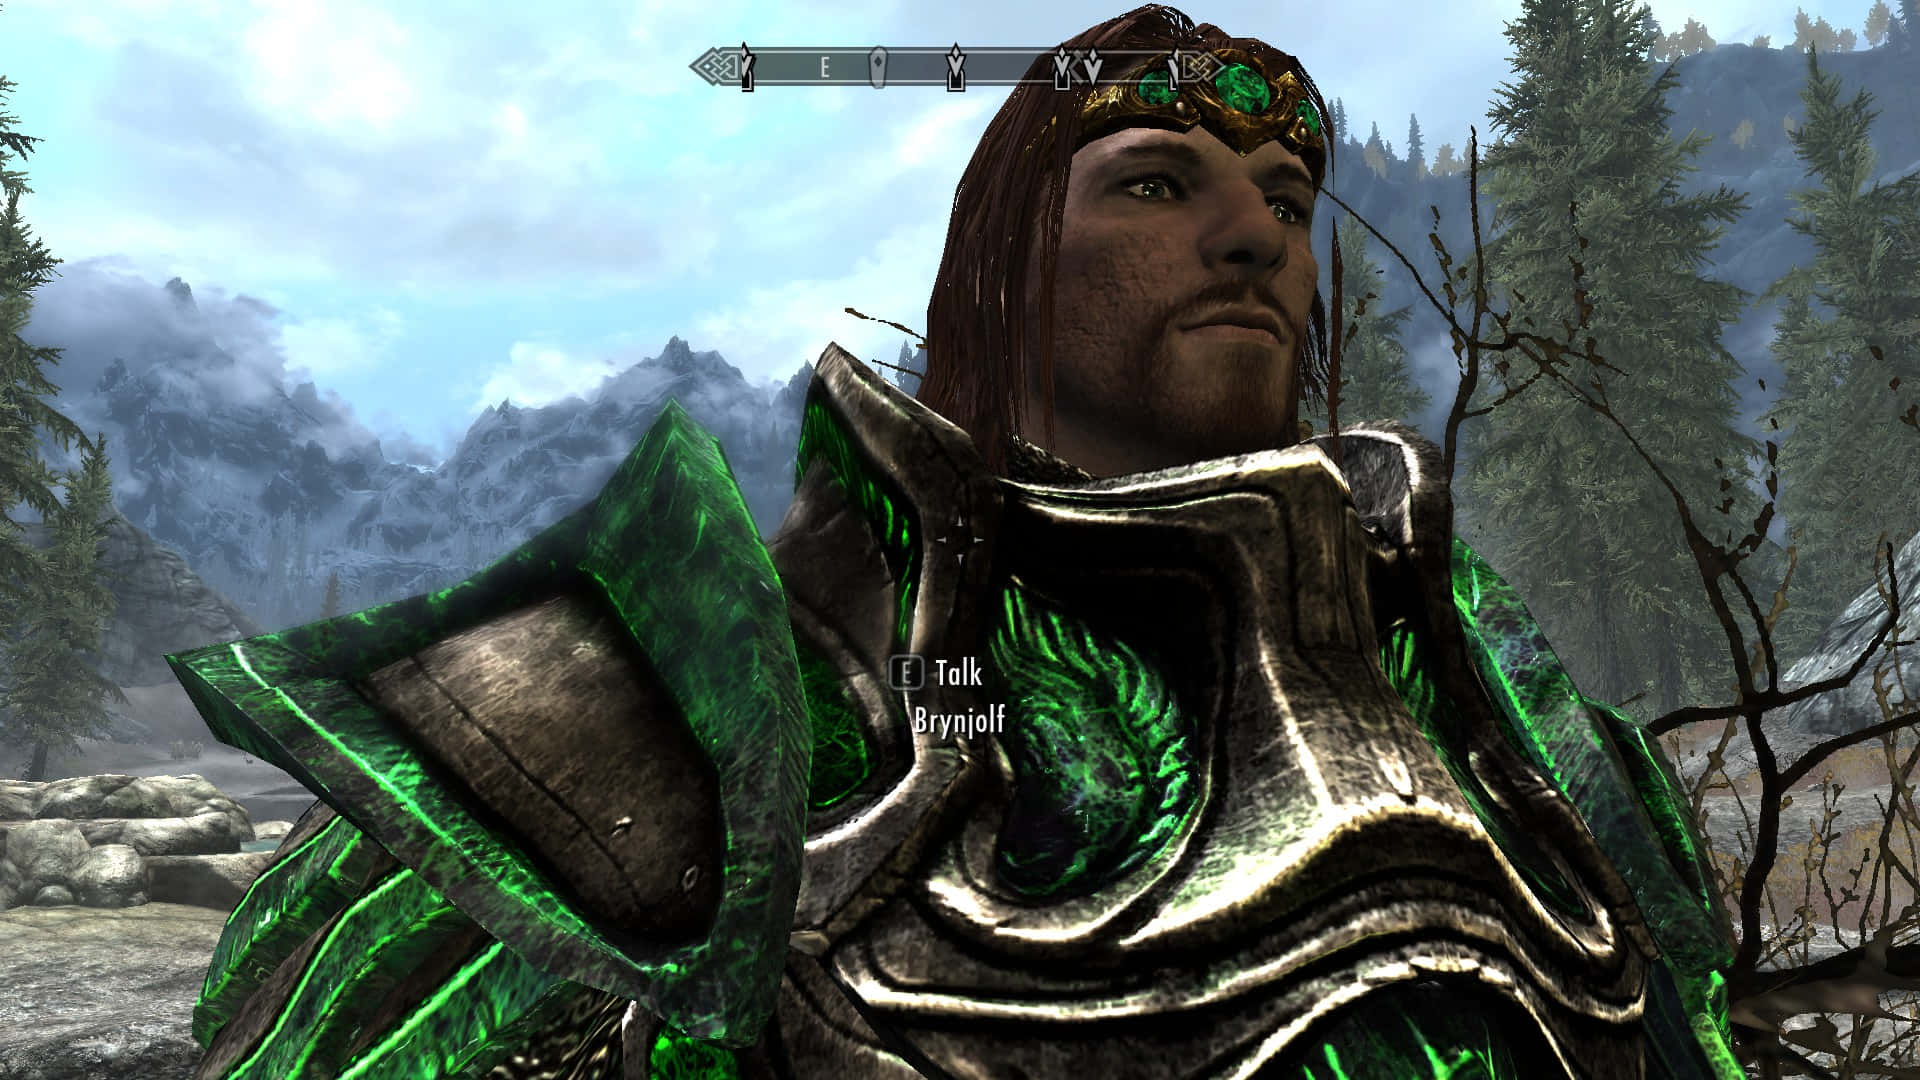 Brynjolf, the master thief of Thieves Guild in the captivating world of Skyrim Wallpaper